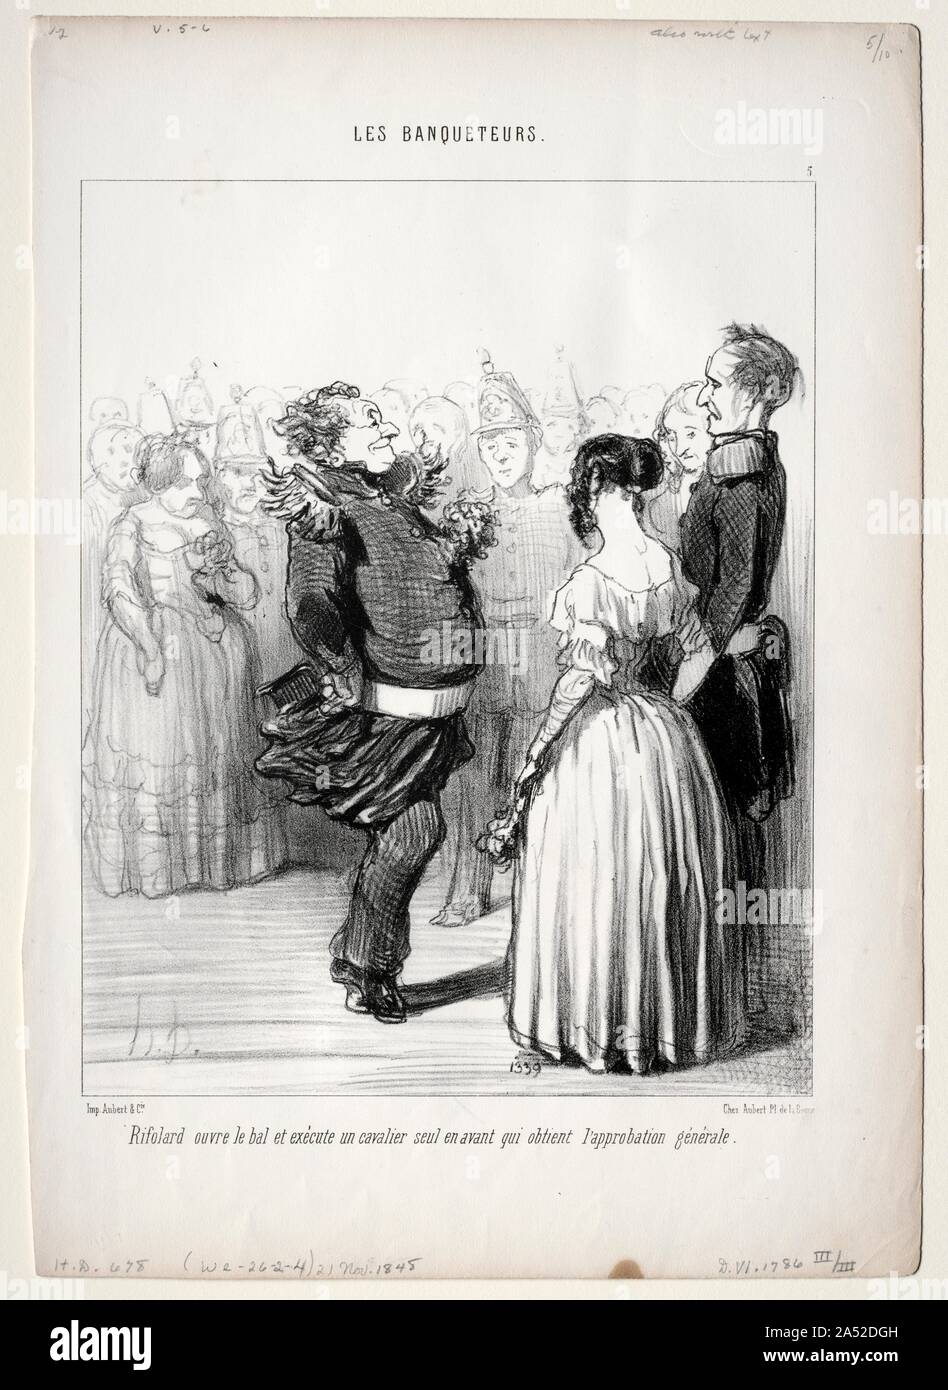 The Banqueters, plate 5: Rifolard opens the ball, 1848. Stock Photo